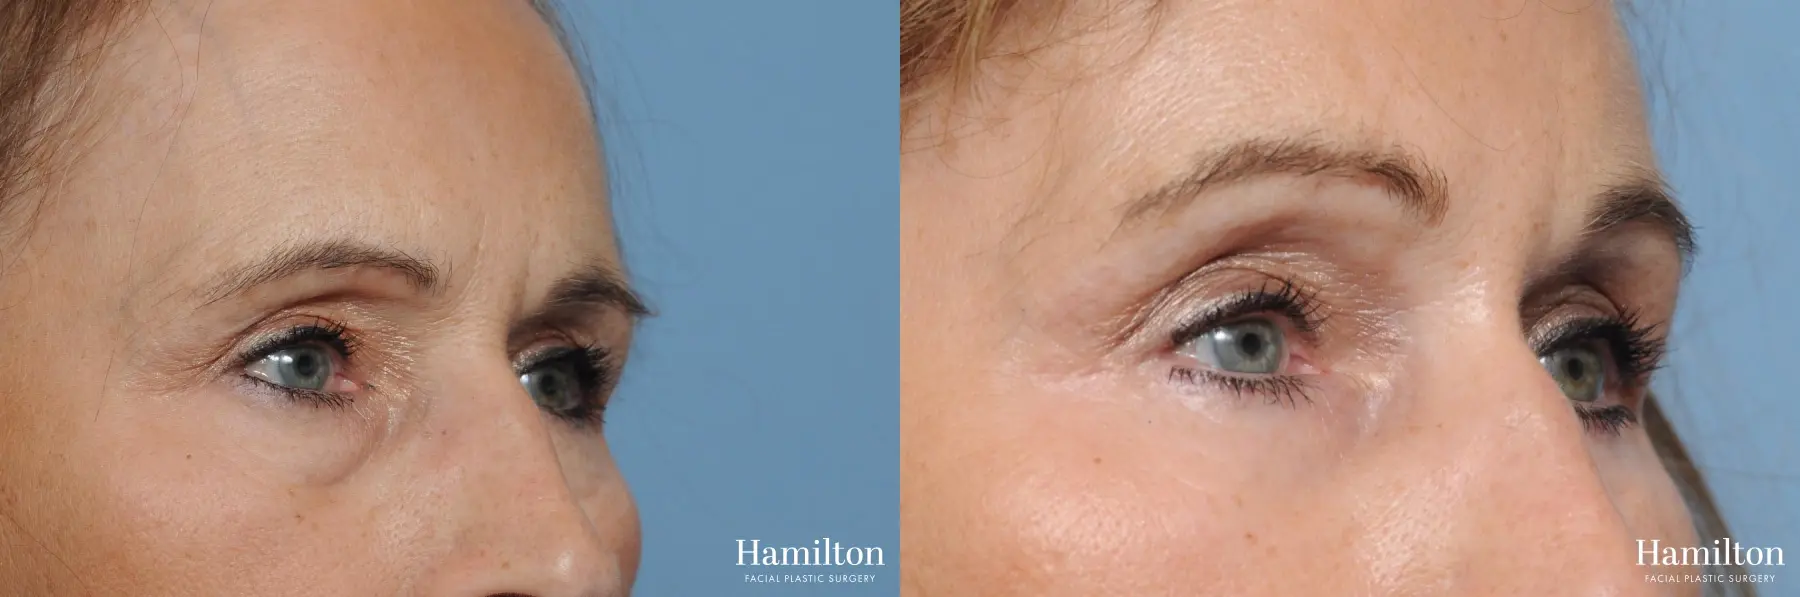 Blepharoplasty: Patient 7 - Before and After 3